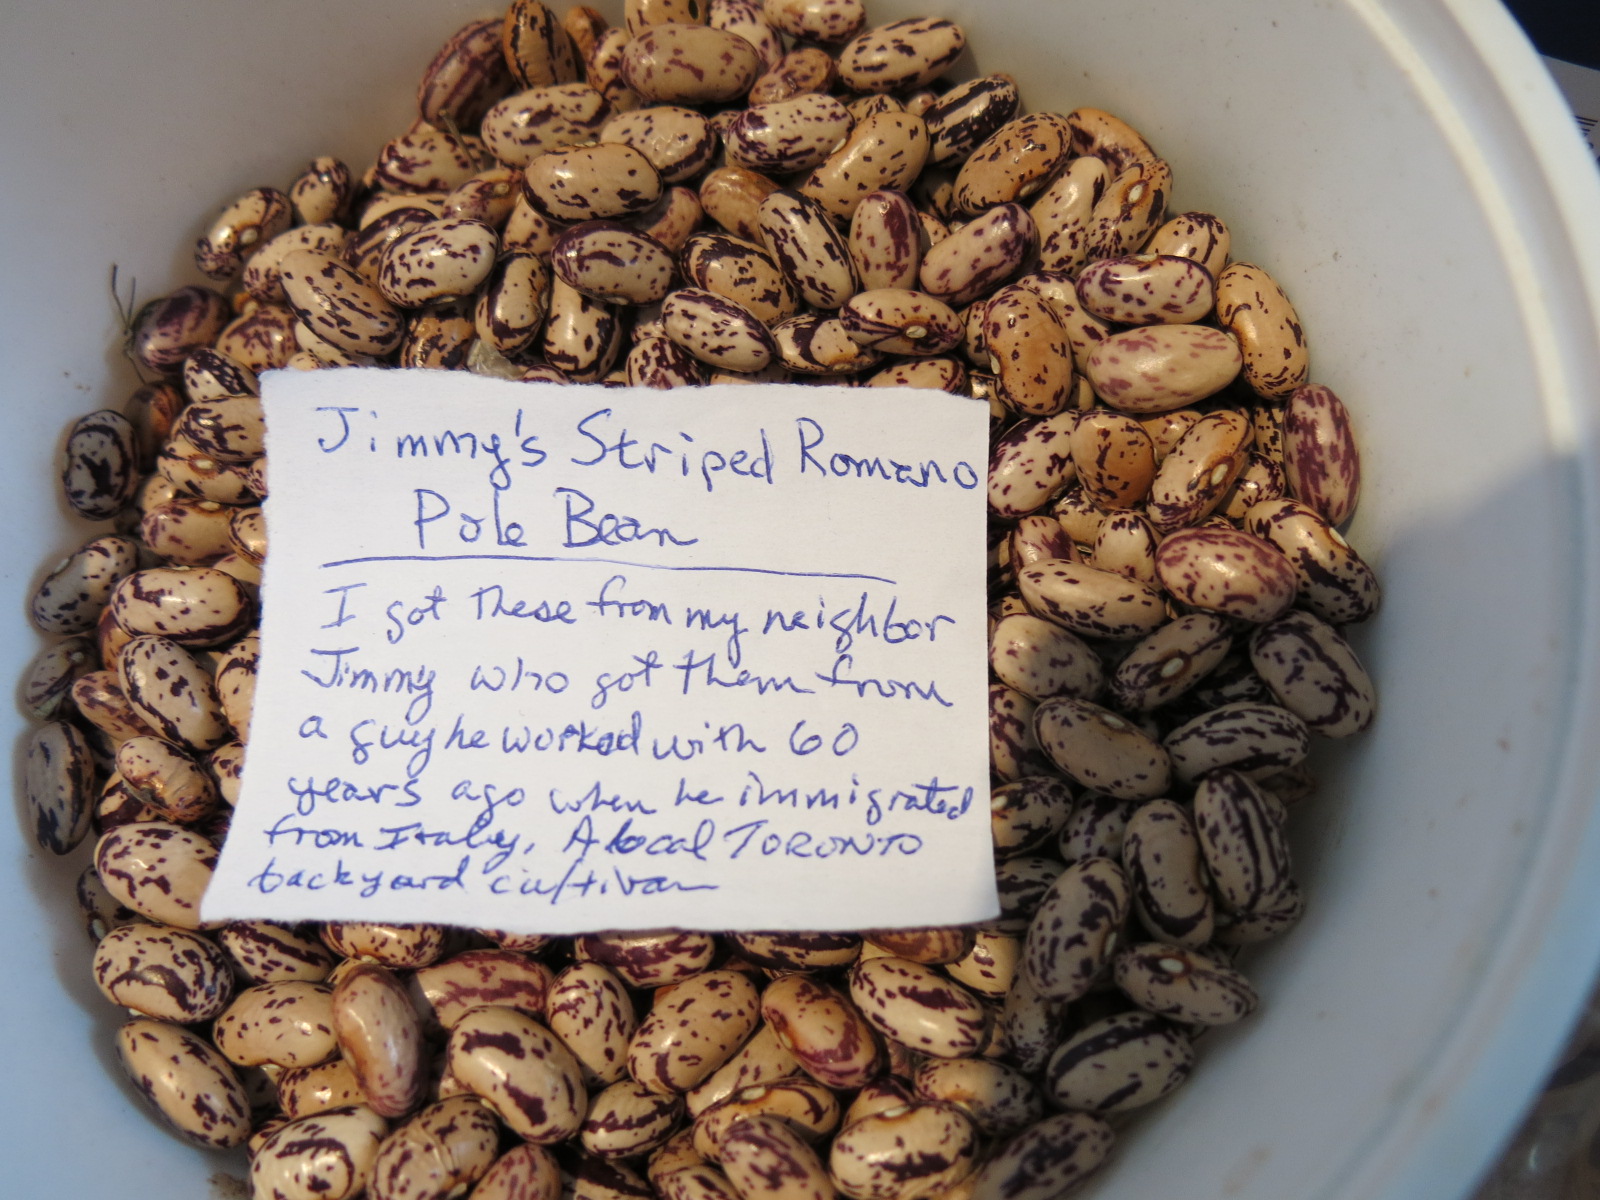 Beans with a story, donated to seed exchange in Parkdale